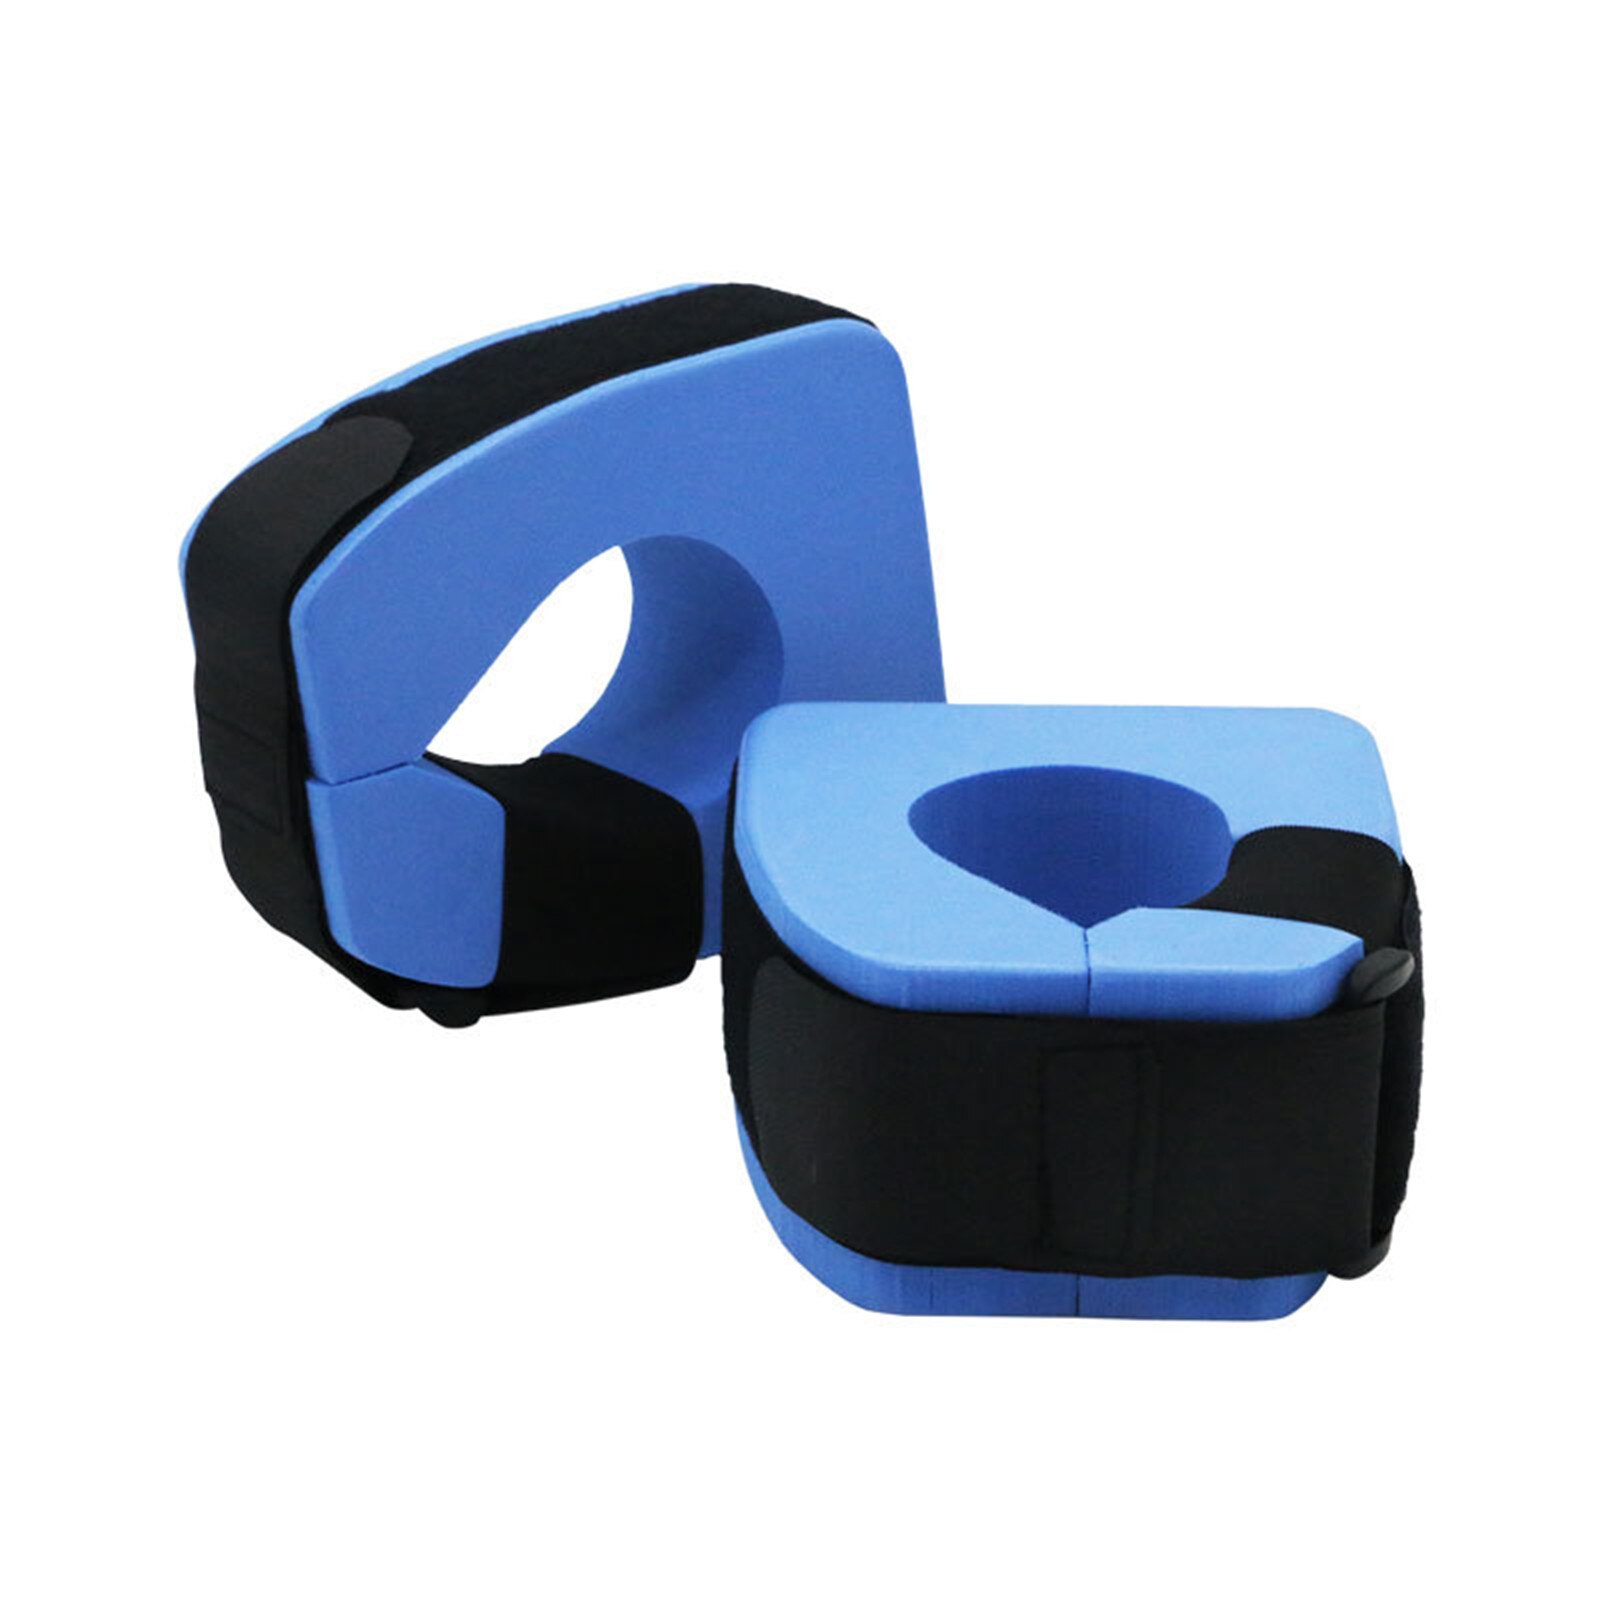 2 Pcs Blue Foam Aquatic Cuffs Swimming Leggings Arm Floating Ring Heavy Weights Water Exercise Aerobics Rings Swim Accessories: Default Title